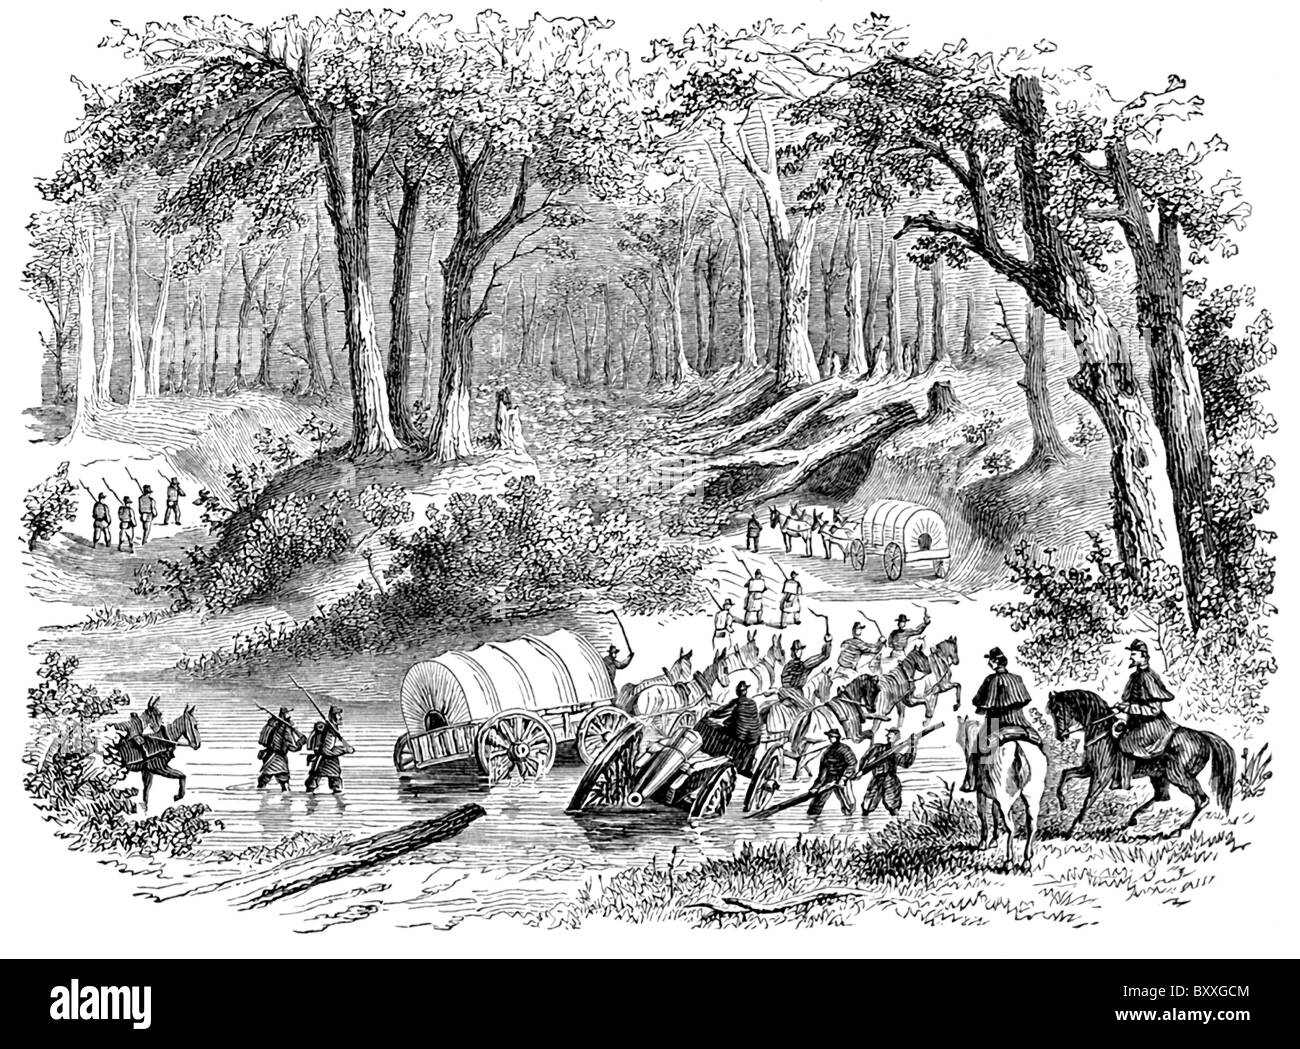 In the Peninsular Campaign (April-July 1862) of the U.S. Civil War, the rain had flooded area near Yorktown in Virginia. Stock Photo